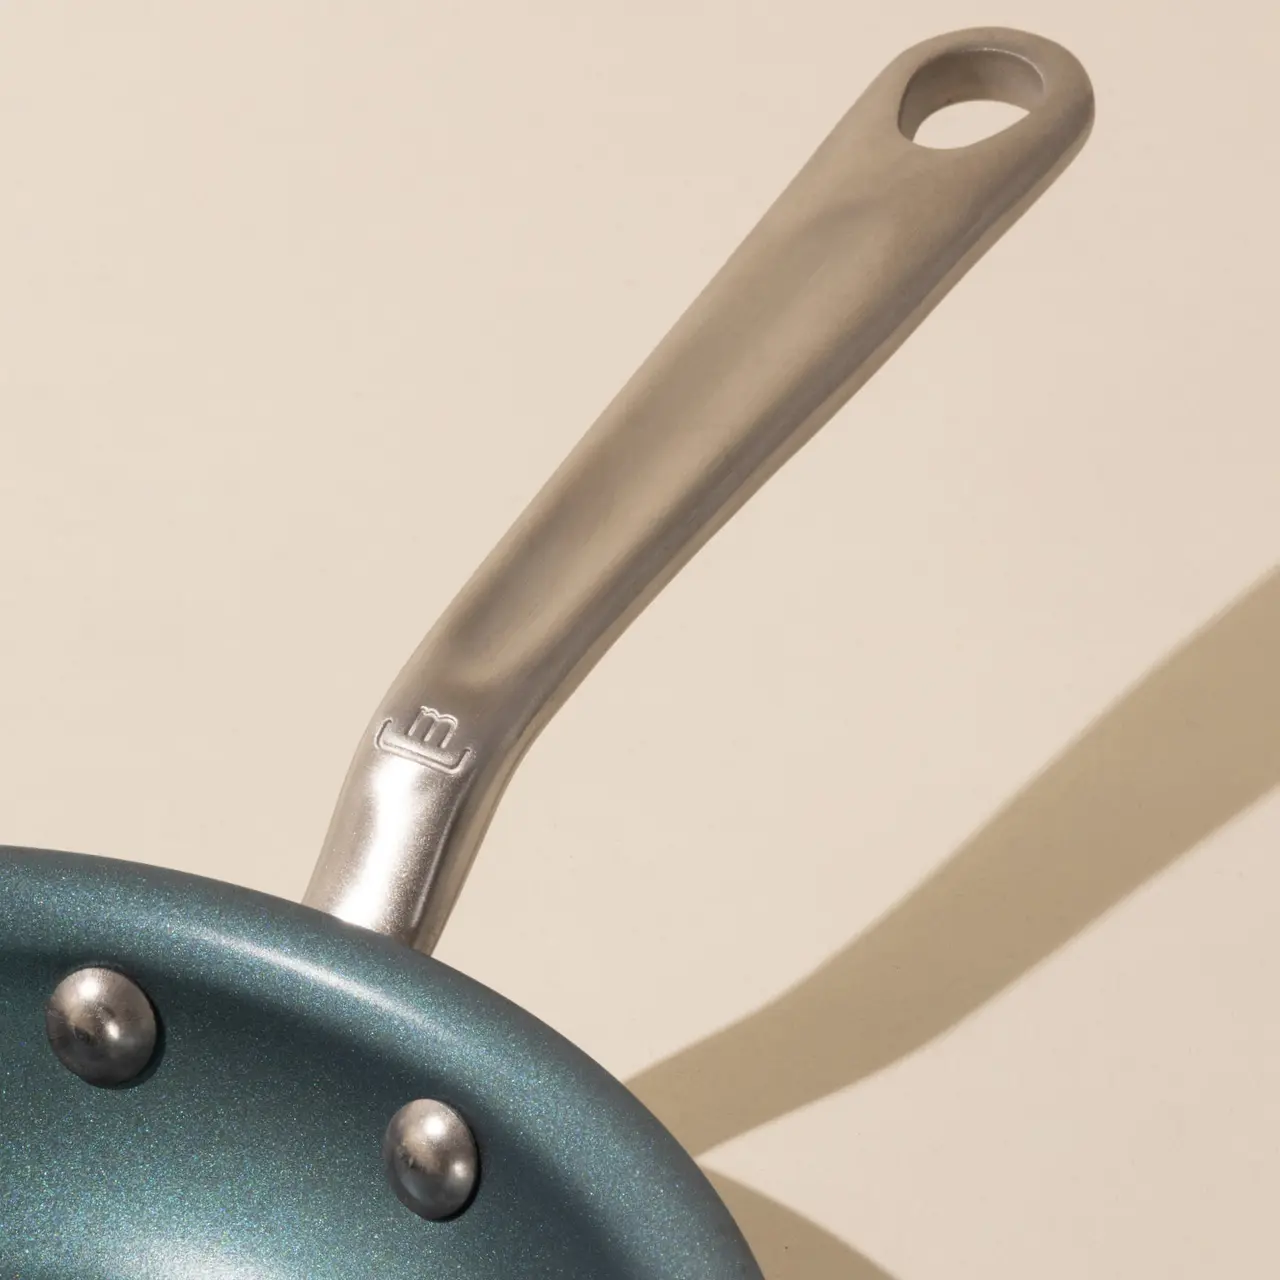 A close-up of a teal frying pan with a silver handle against a light background with a shadow stripe across it.